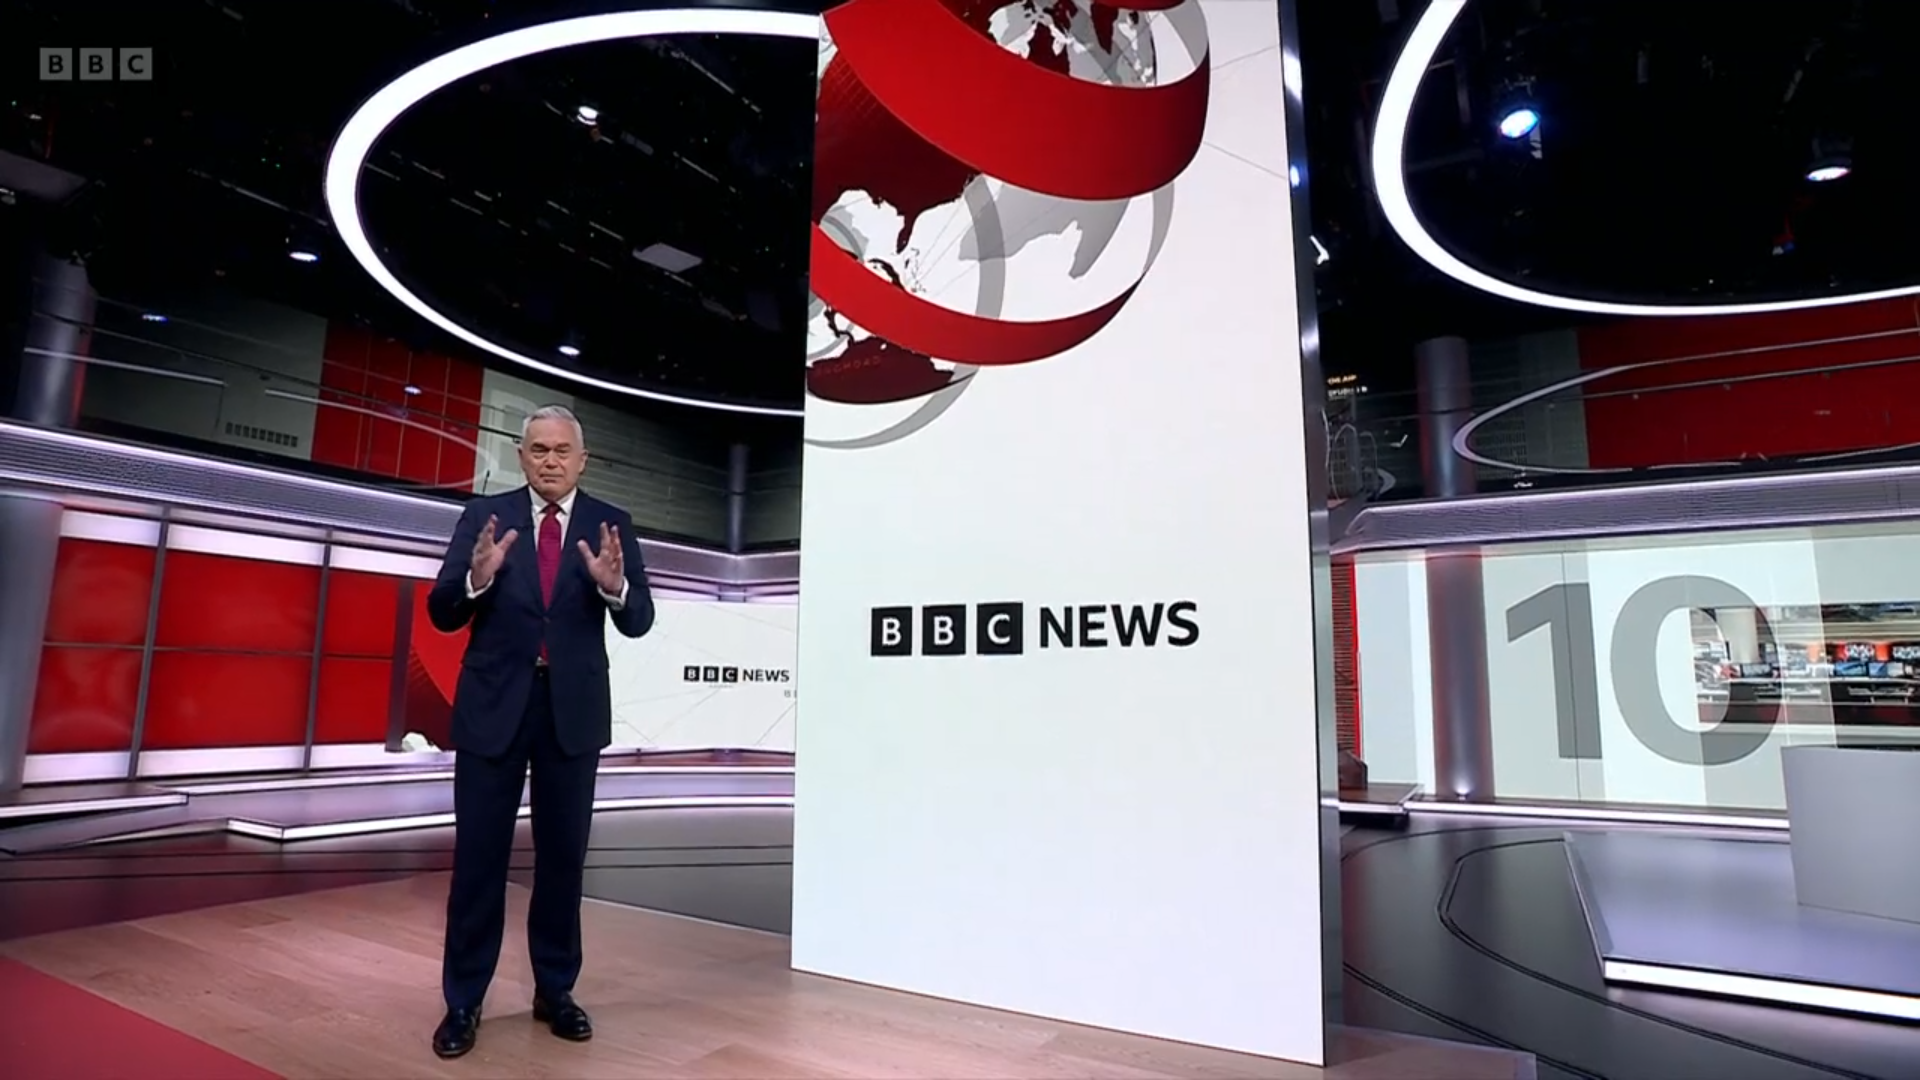 The new BBC News set in Studio B. It is a wide shot of a tall LED screen, with a large curved screen in the background, and part of the BBC logo as decoration up high above the set. Huw Edwards is standing in place. A large 10 is in the background